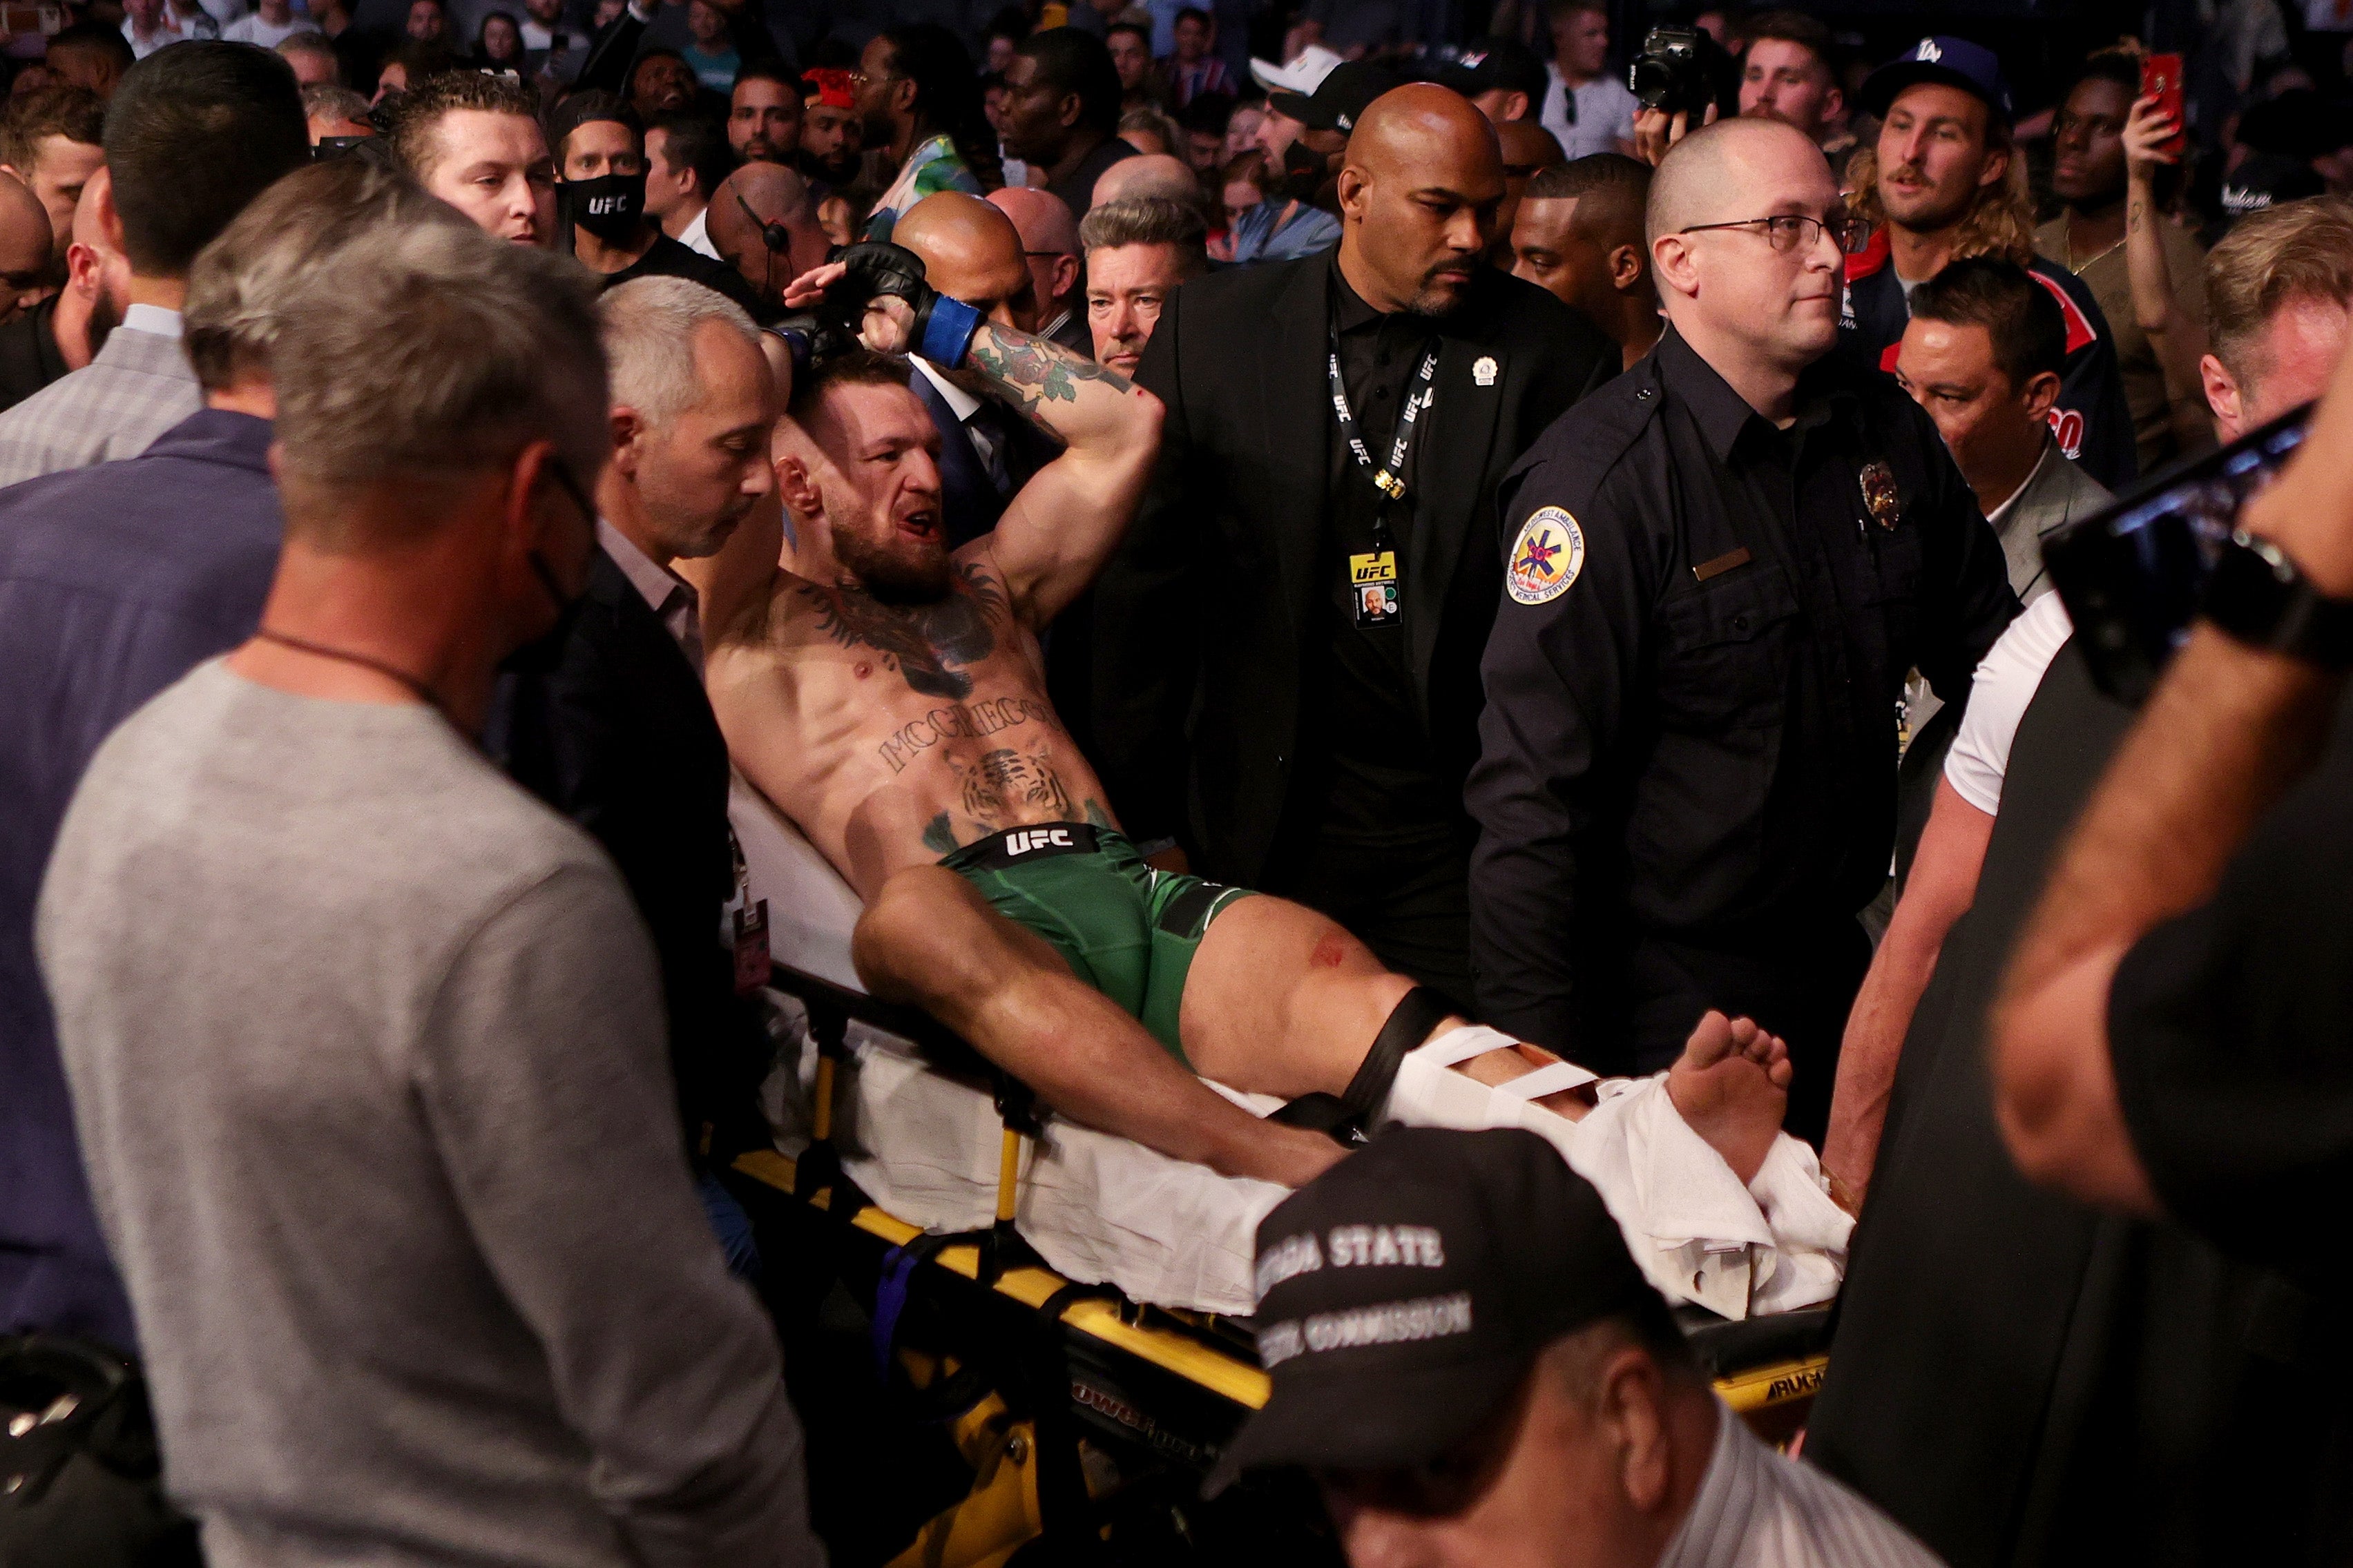 McGregor suffered a broken leg in his last fight, a defeat three years ago